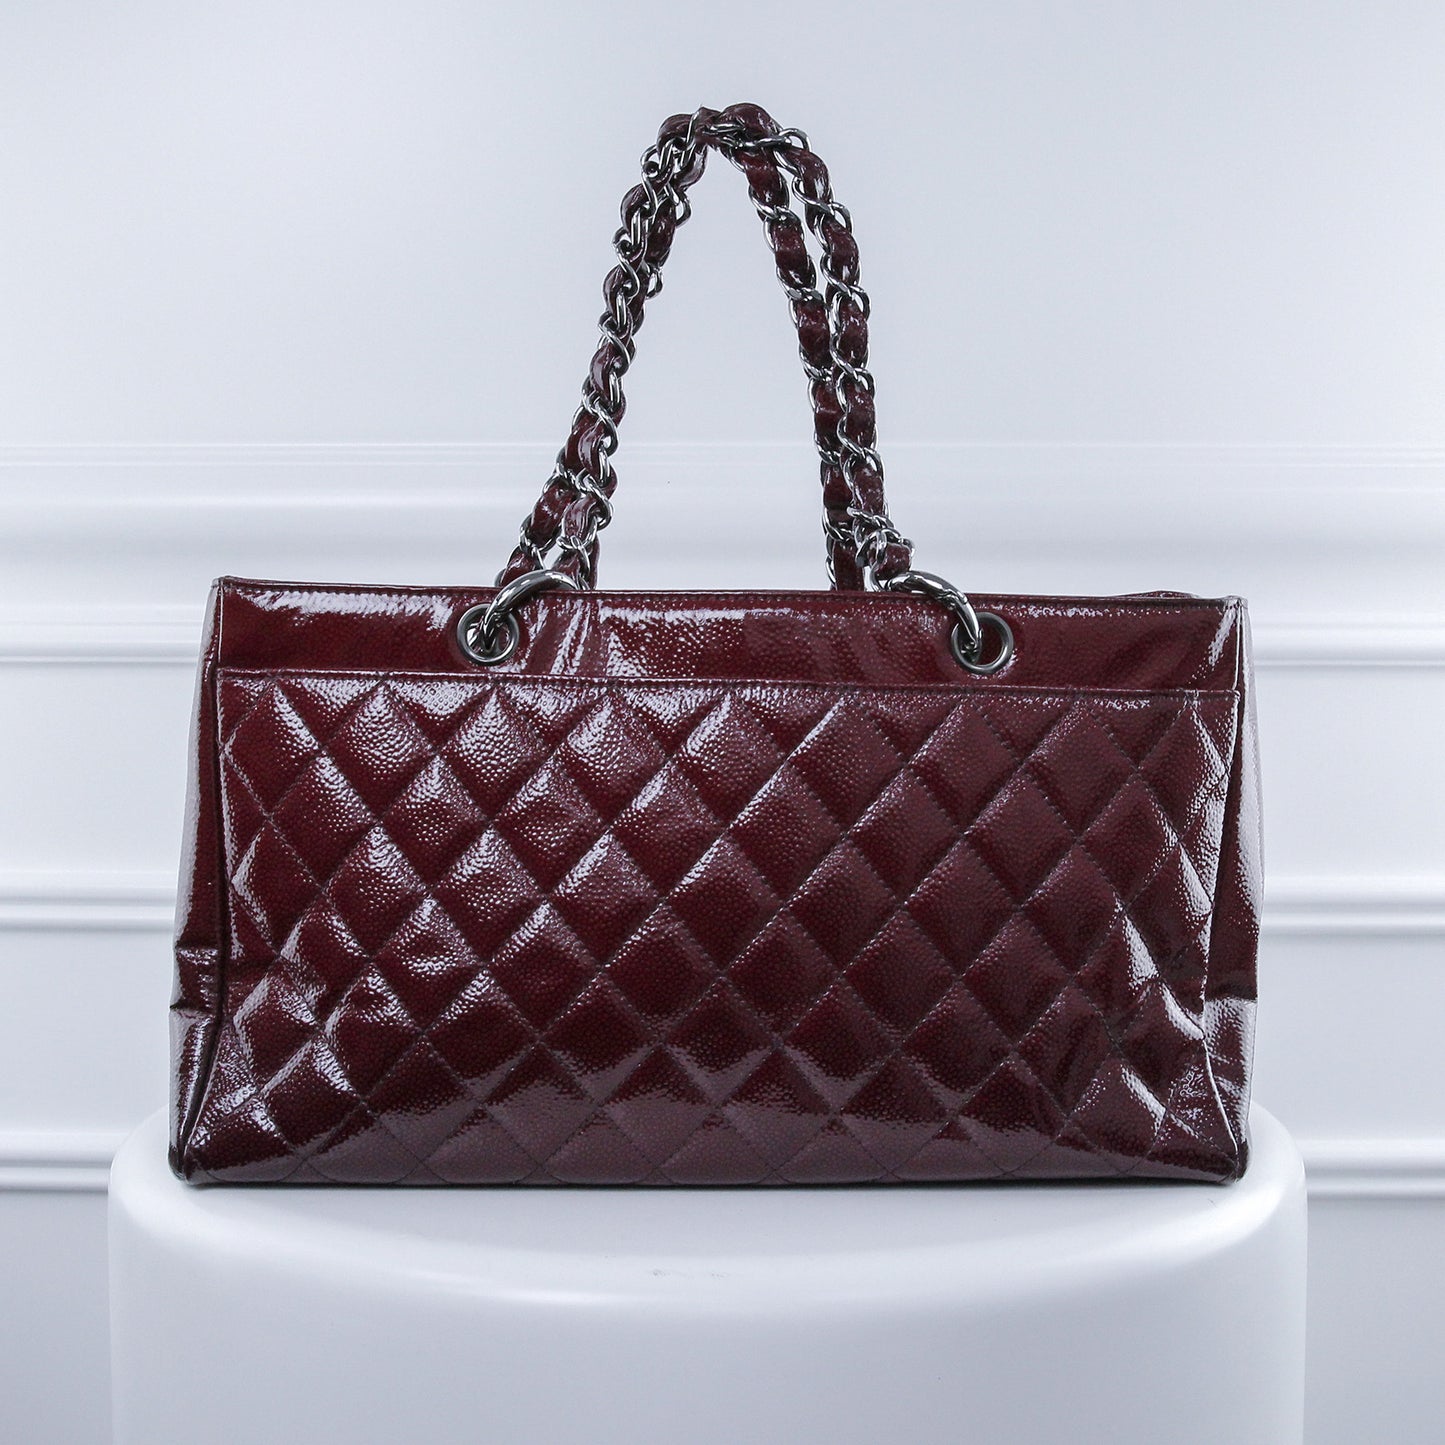 Chanel Dark Red Reissue Shopping Tote Bag